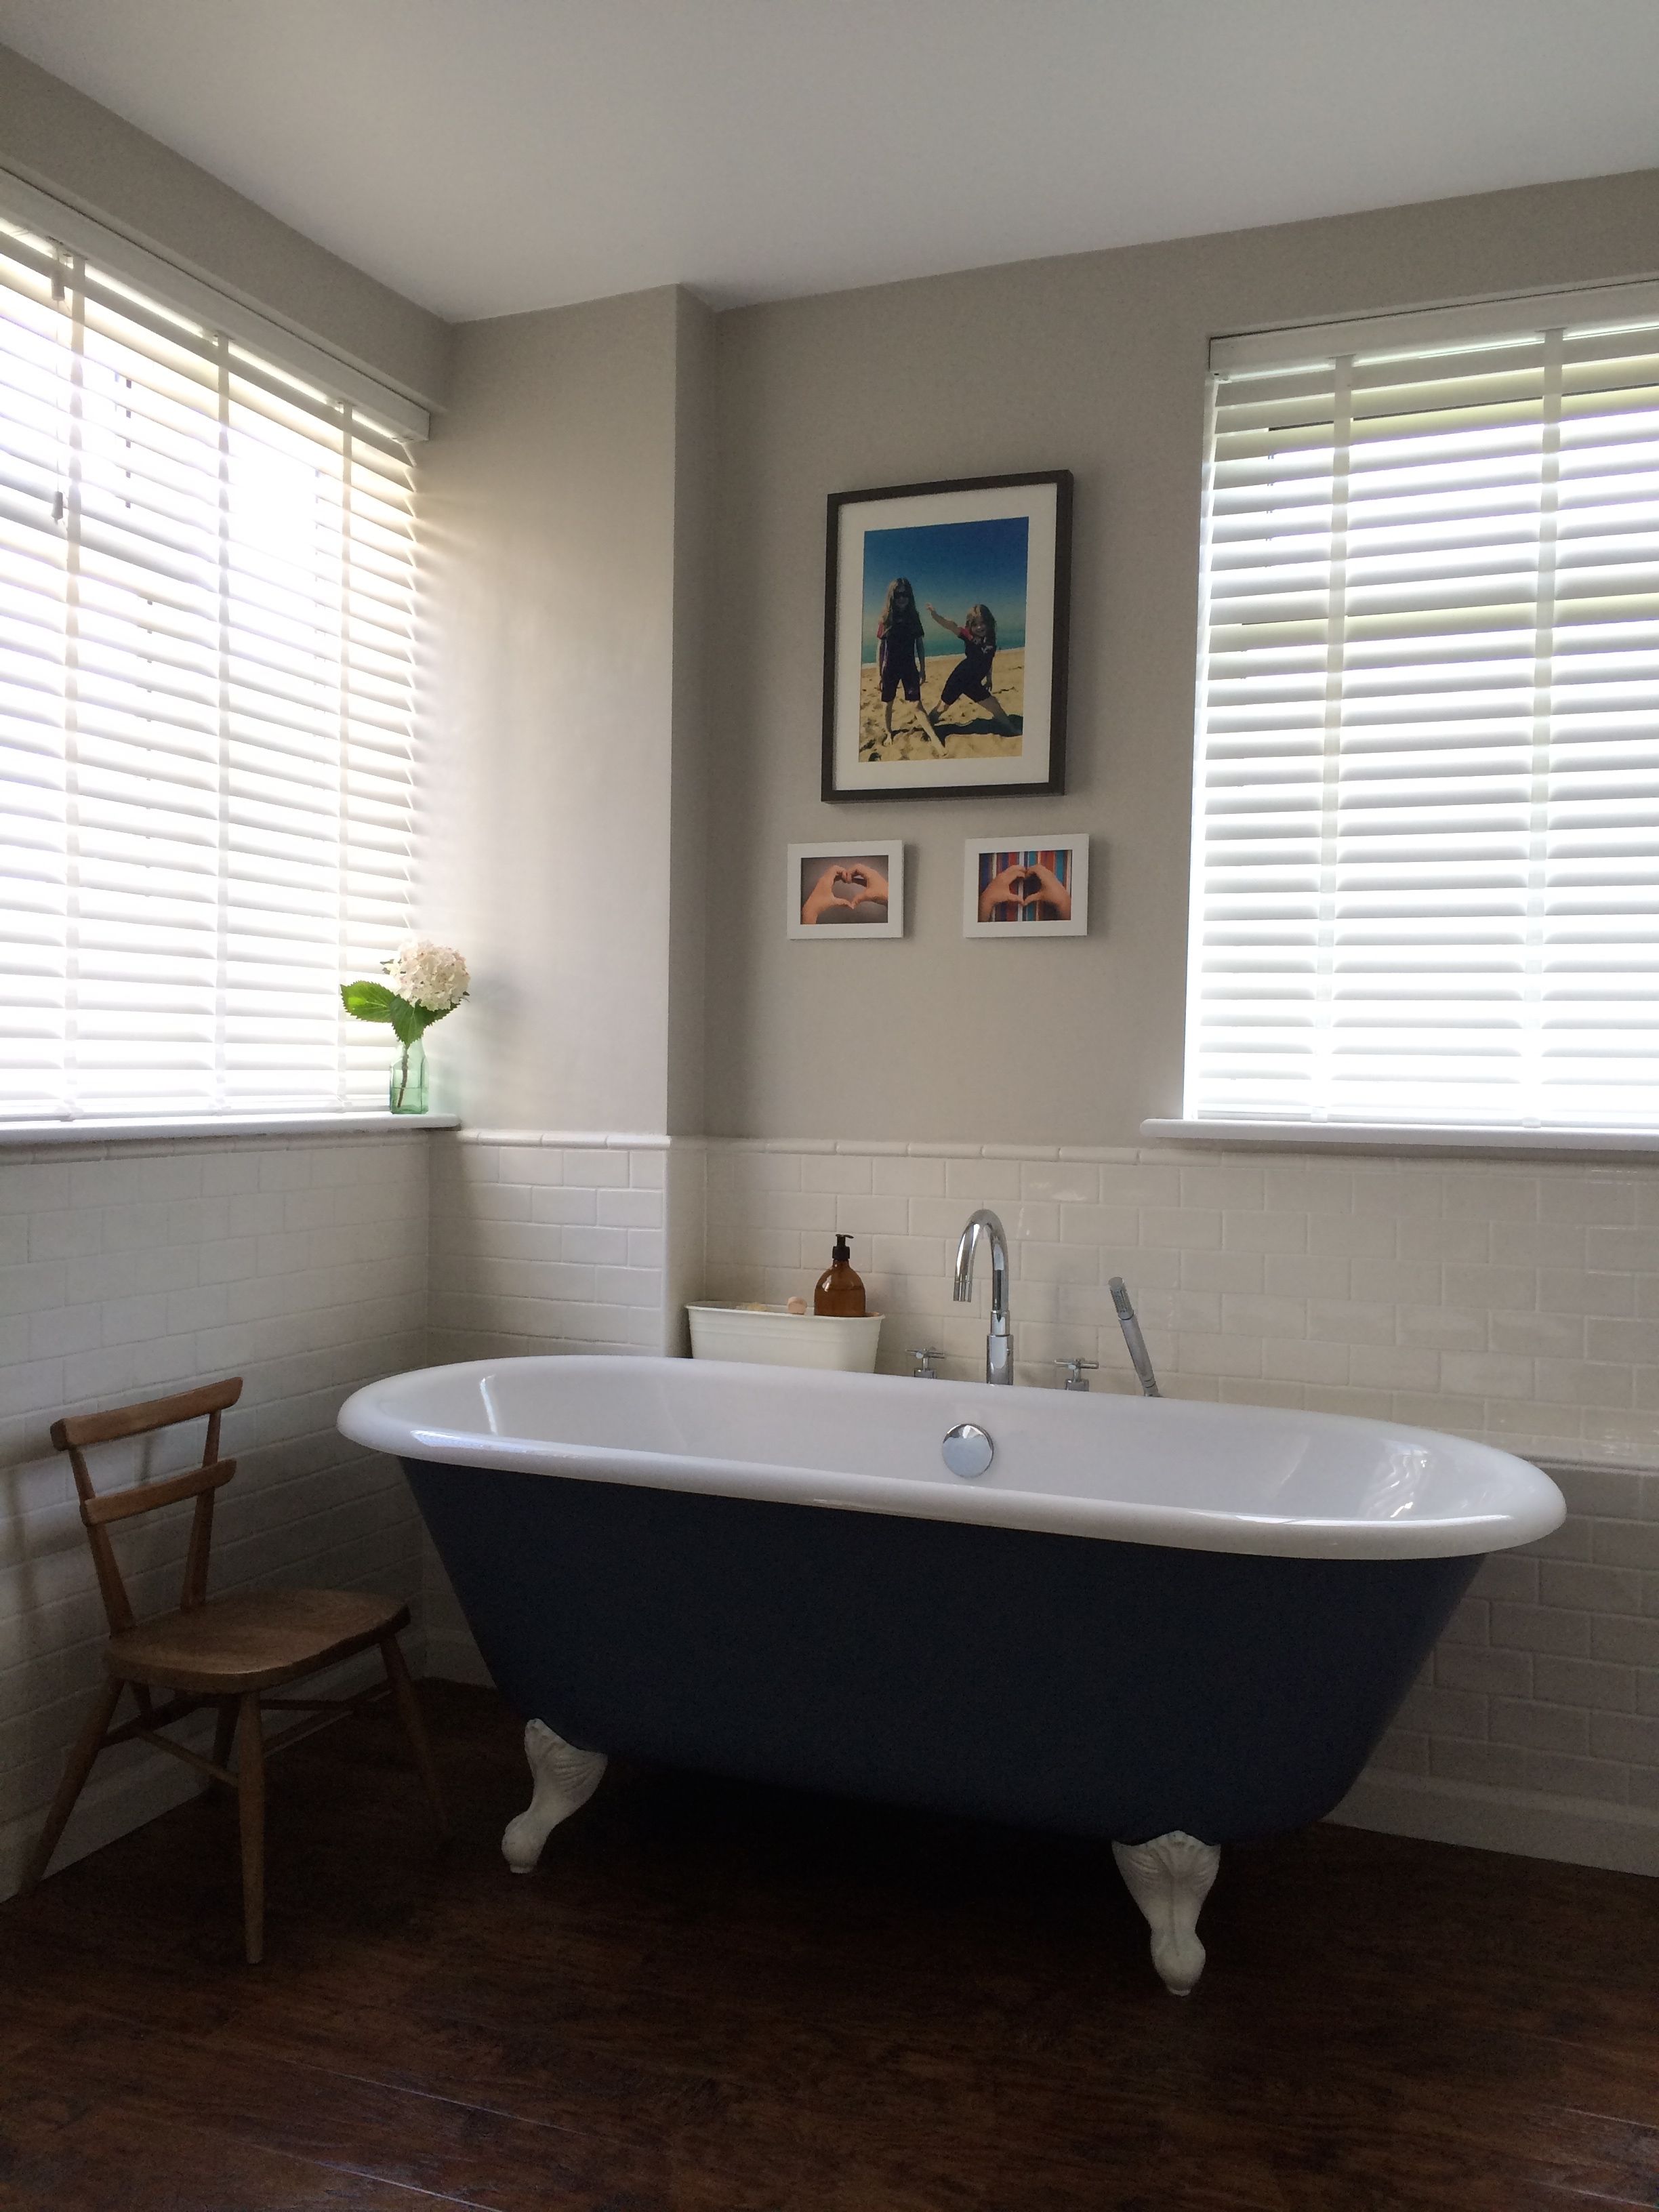 Bathroom Web Blinds With Bathroom Blinds (View 6 of 15)